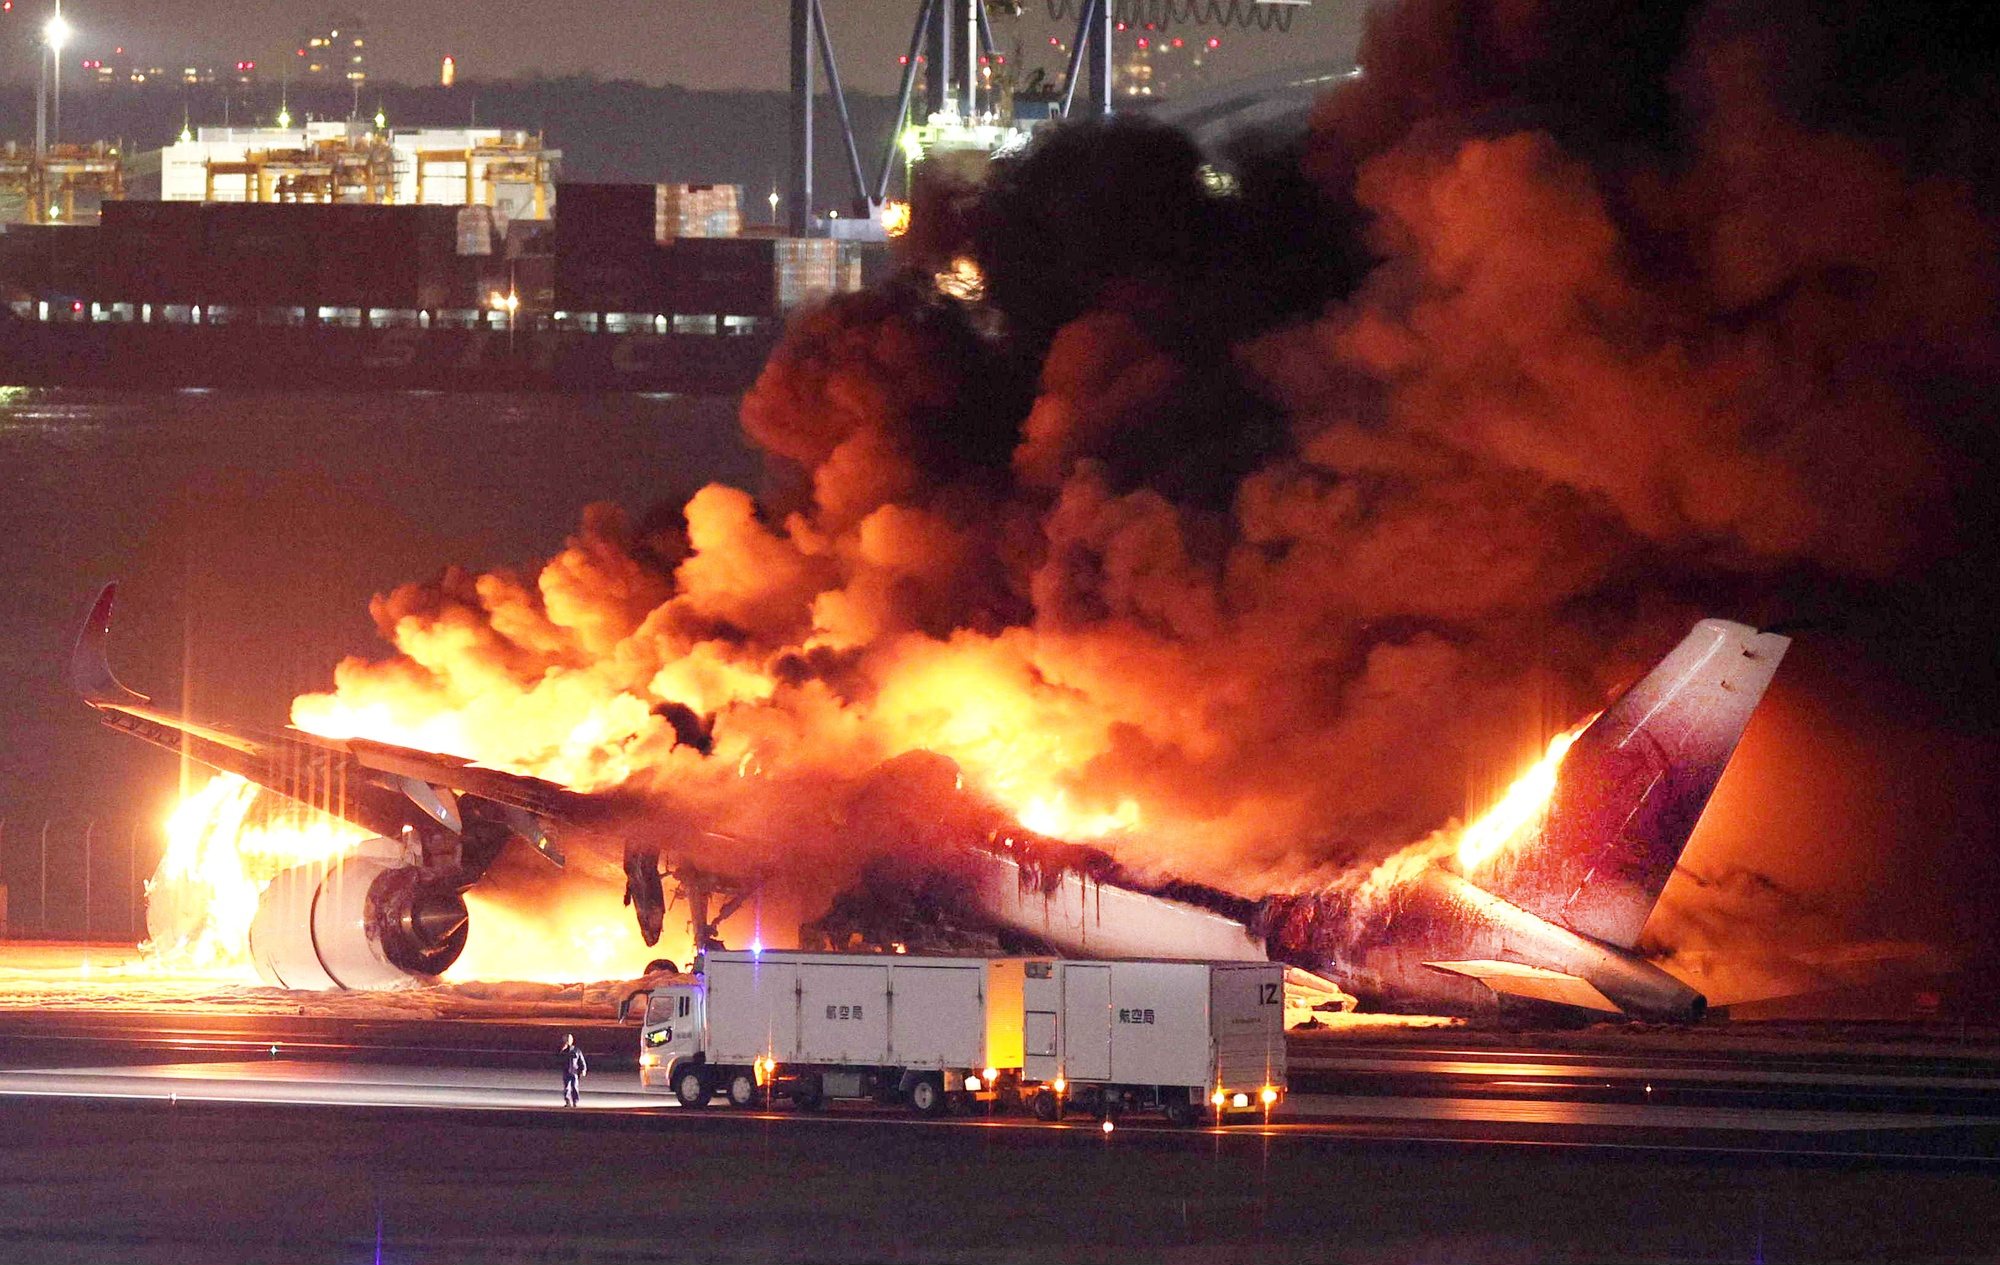 epa11053270 A Japan Airline (JAL) passenger plane bursts into flames on the tarmac at Haneda Airport in Tokyo, Japan, 02 January 2024, after its landing. The JAL airplane apparently collided with a Japan Coast Guard plane as it landed. All 379 people on the JAL plane, including 367 passengers and 12 crew members, have been safely evacuated, according to JAL. The coast guard plane carried six crew members, one escaped from the aircraft and the others were unaccounred for, the coast guard said.  EPA/JIJI PRESS JAPAN OUT EDITORIAL USE ONLY/